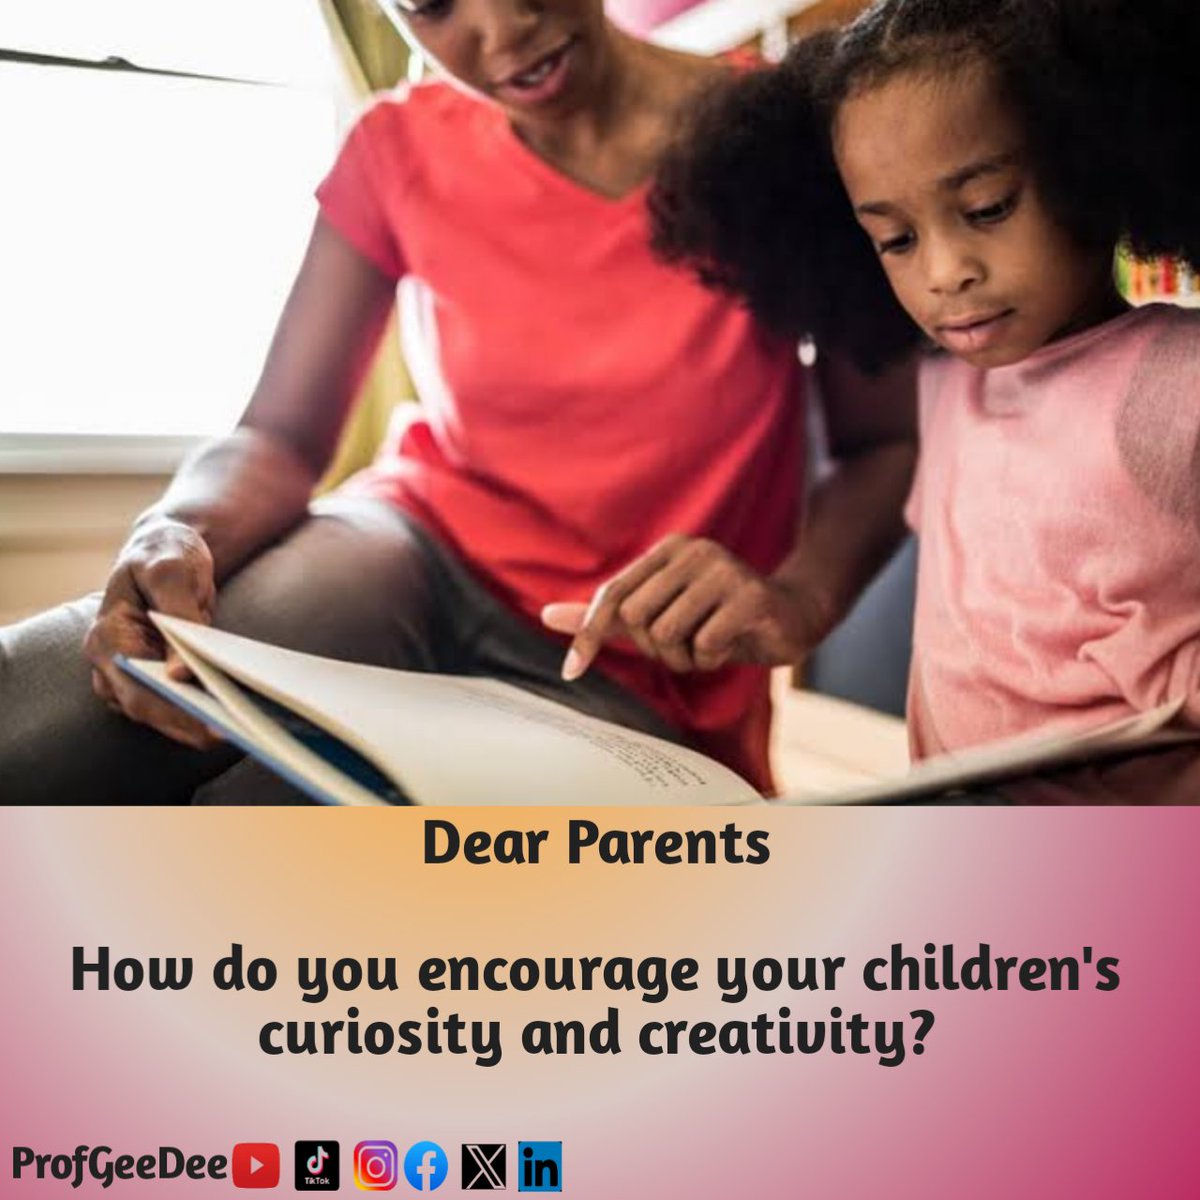 Your encouragement can go a long way in helping your children explore the wonders of innovation.

Do not shut your children out

#earlyyears
#earlylearning
#earlychildhooddevelopment
#dearparentseries
#profgeedee